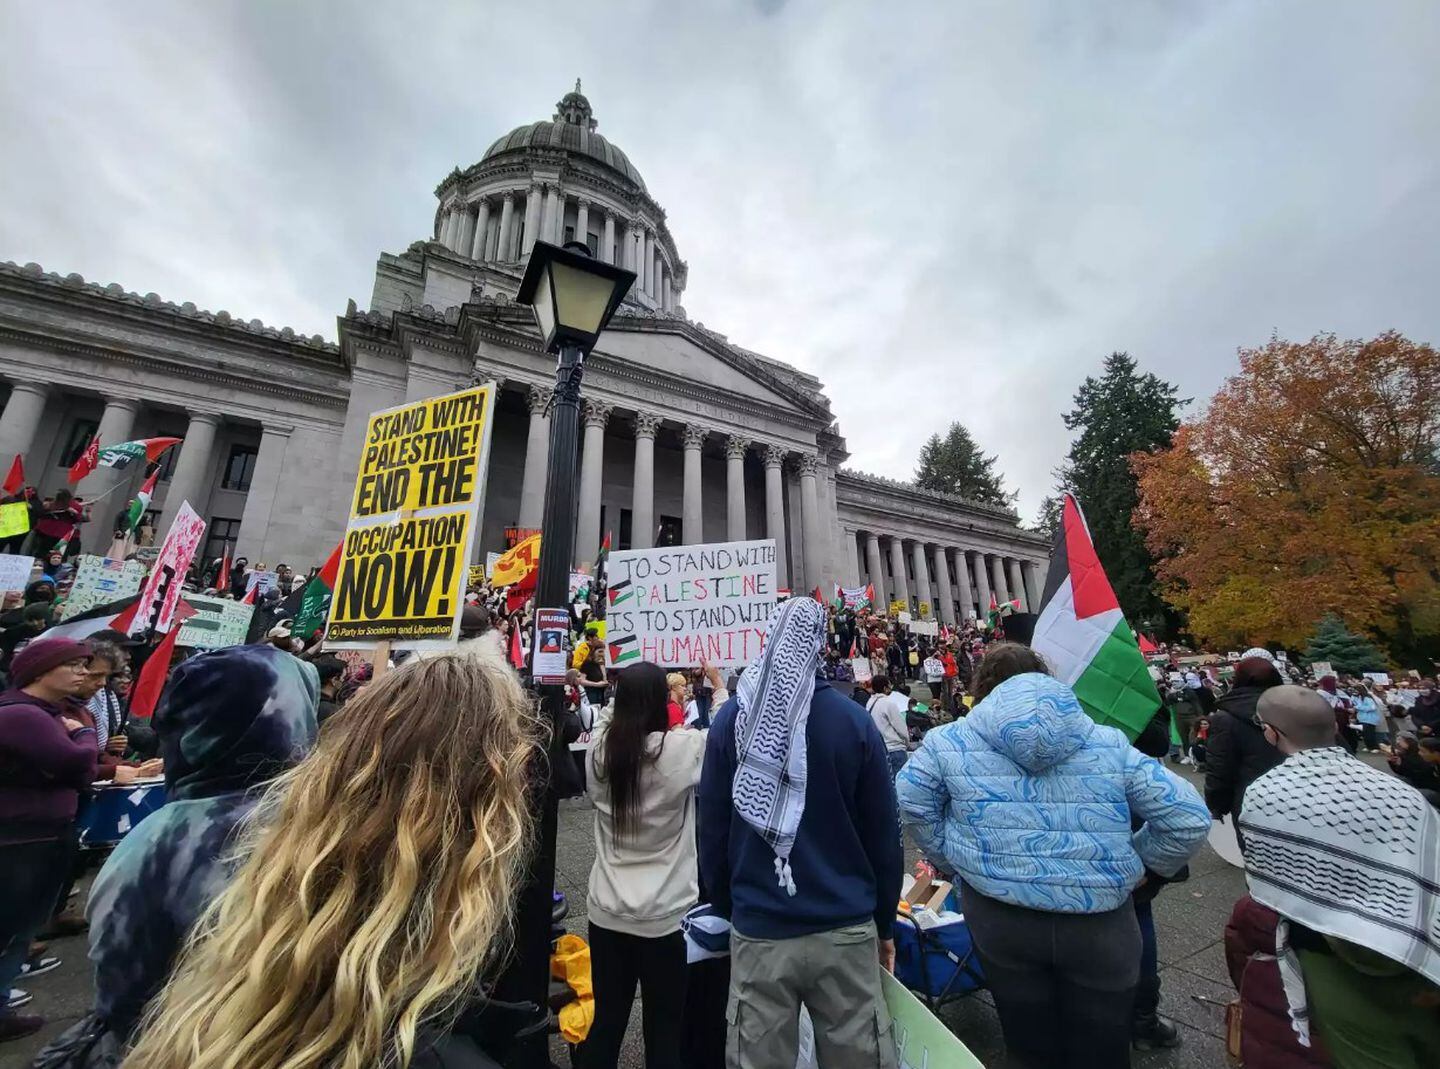 10,000 march on MN Capitol for Gaza — Fight Back! News